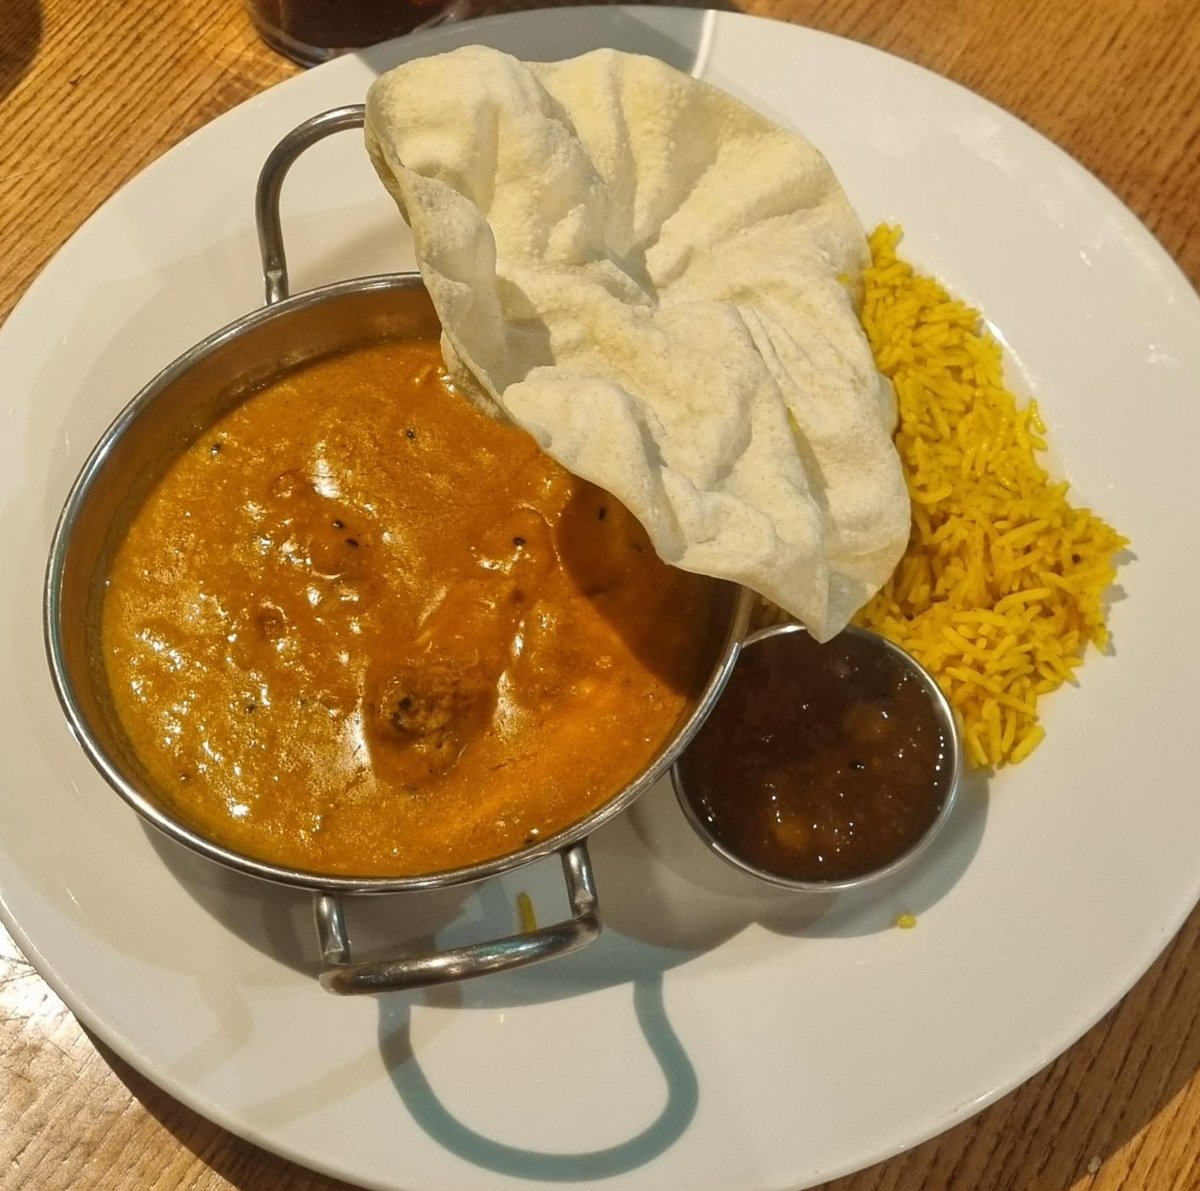 Indulge in a scrumptious curry and refreshing drink for just £7! Family time never tasted better. Spice up your mealtime with our mouth-watering options and make memories over a delicious spread. #CurryLovers #FamilyTime #FoodieFaves 🍛🥂